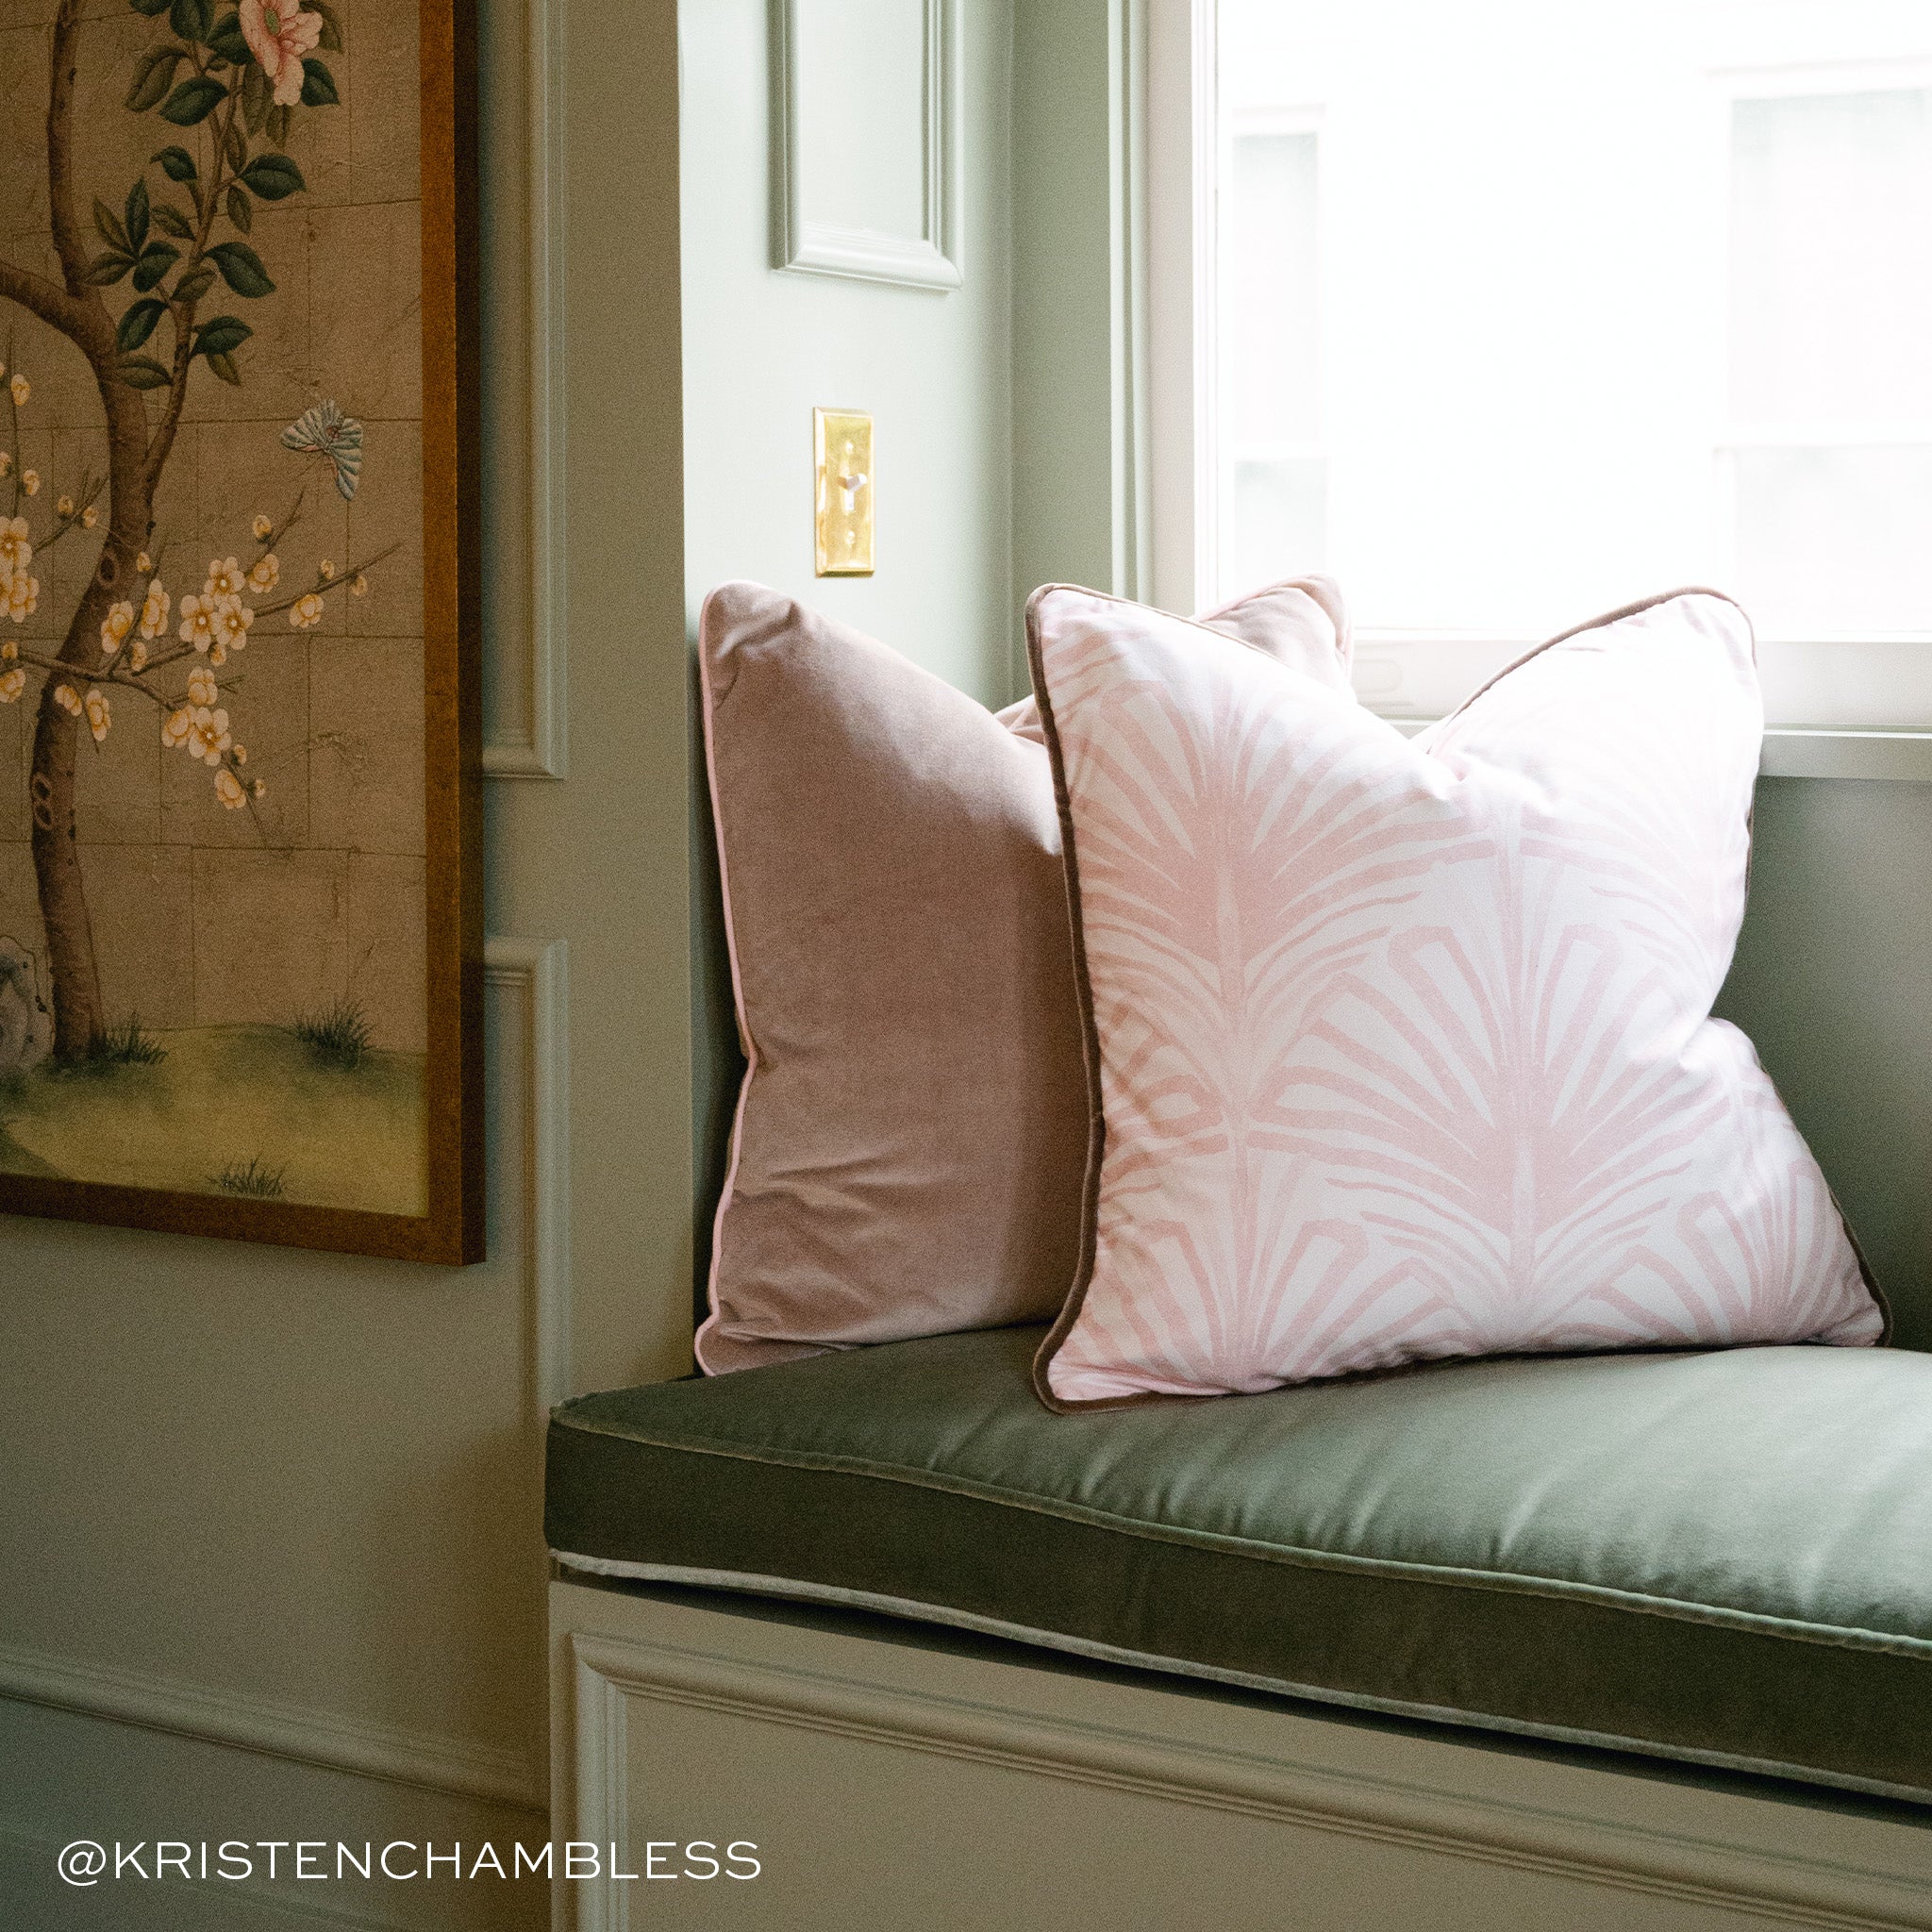 Corner styled with a Fern Green Velvet Mattress under Mauve Velvet Pillow and Rose Pink Art Deco Printed Pillow by illuminated window